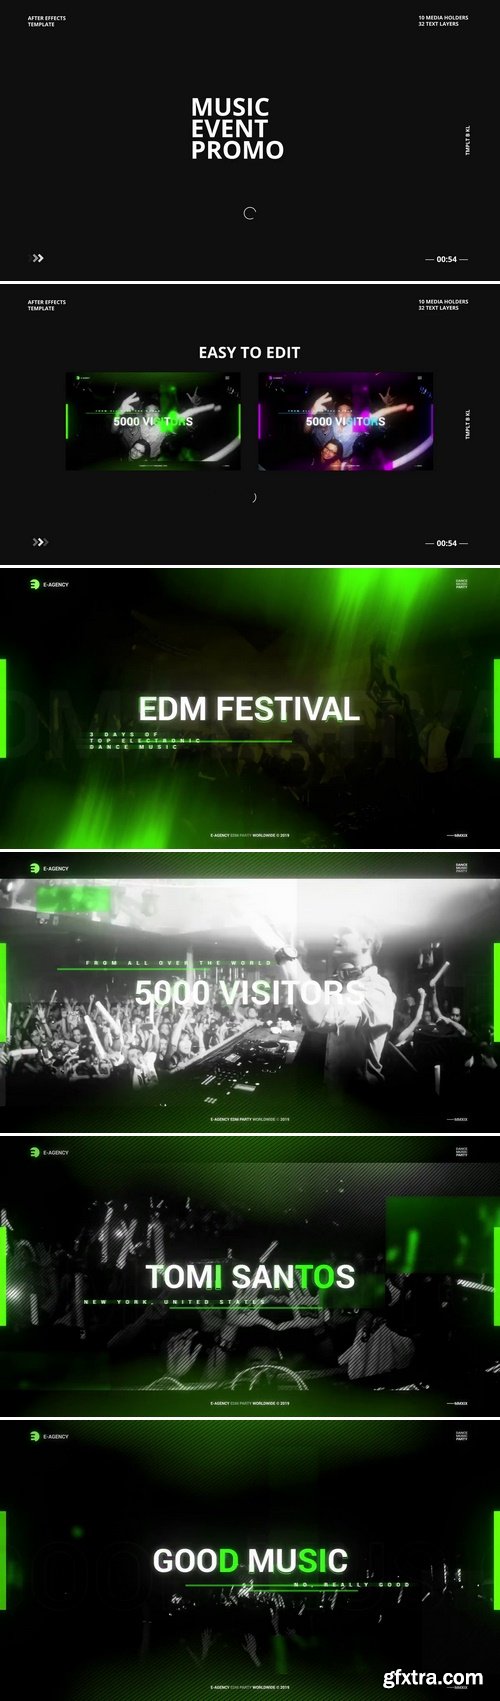 MA - Music Event Promo After Effects Templates 155170